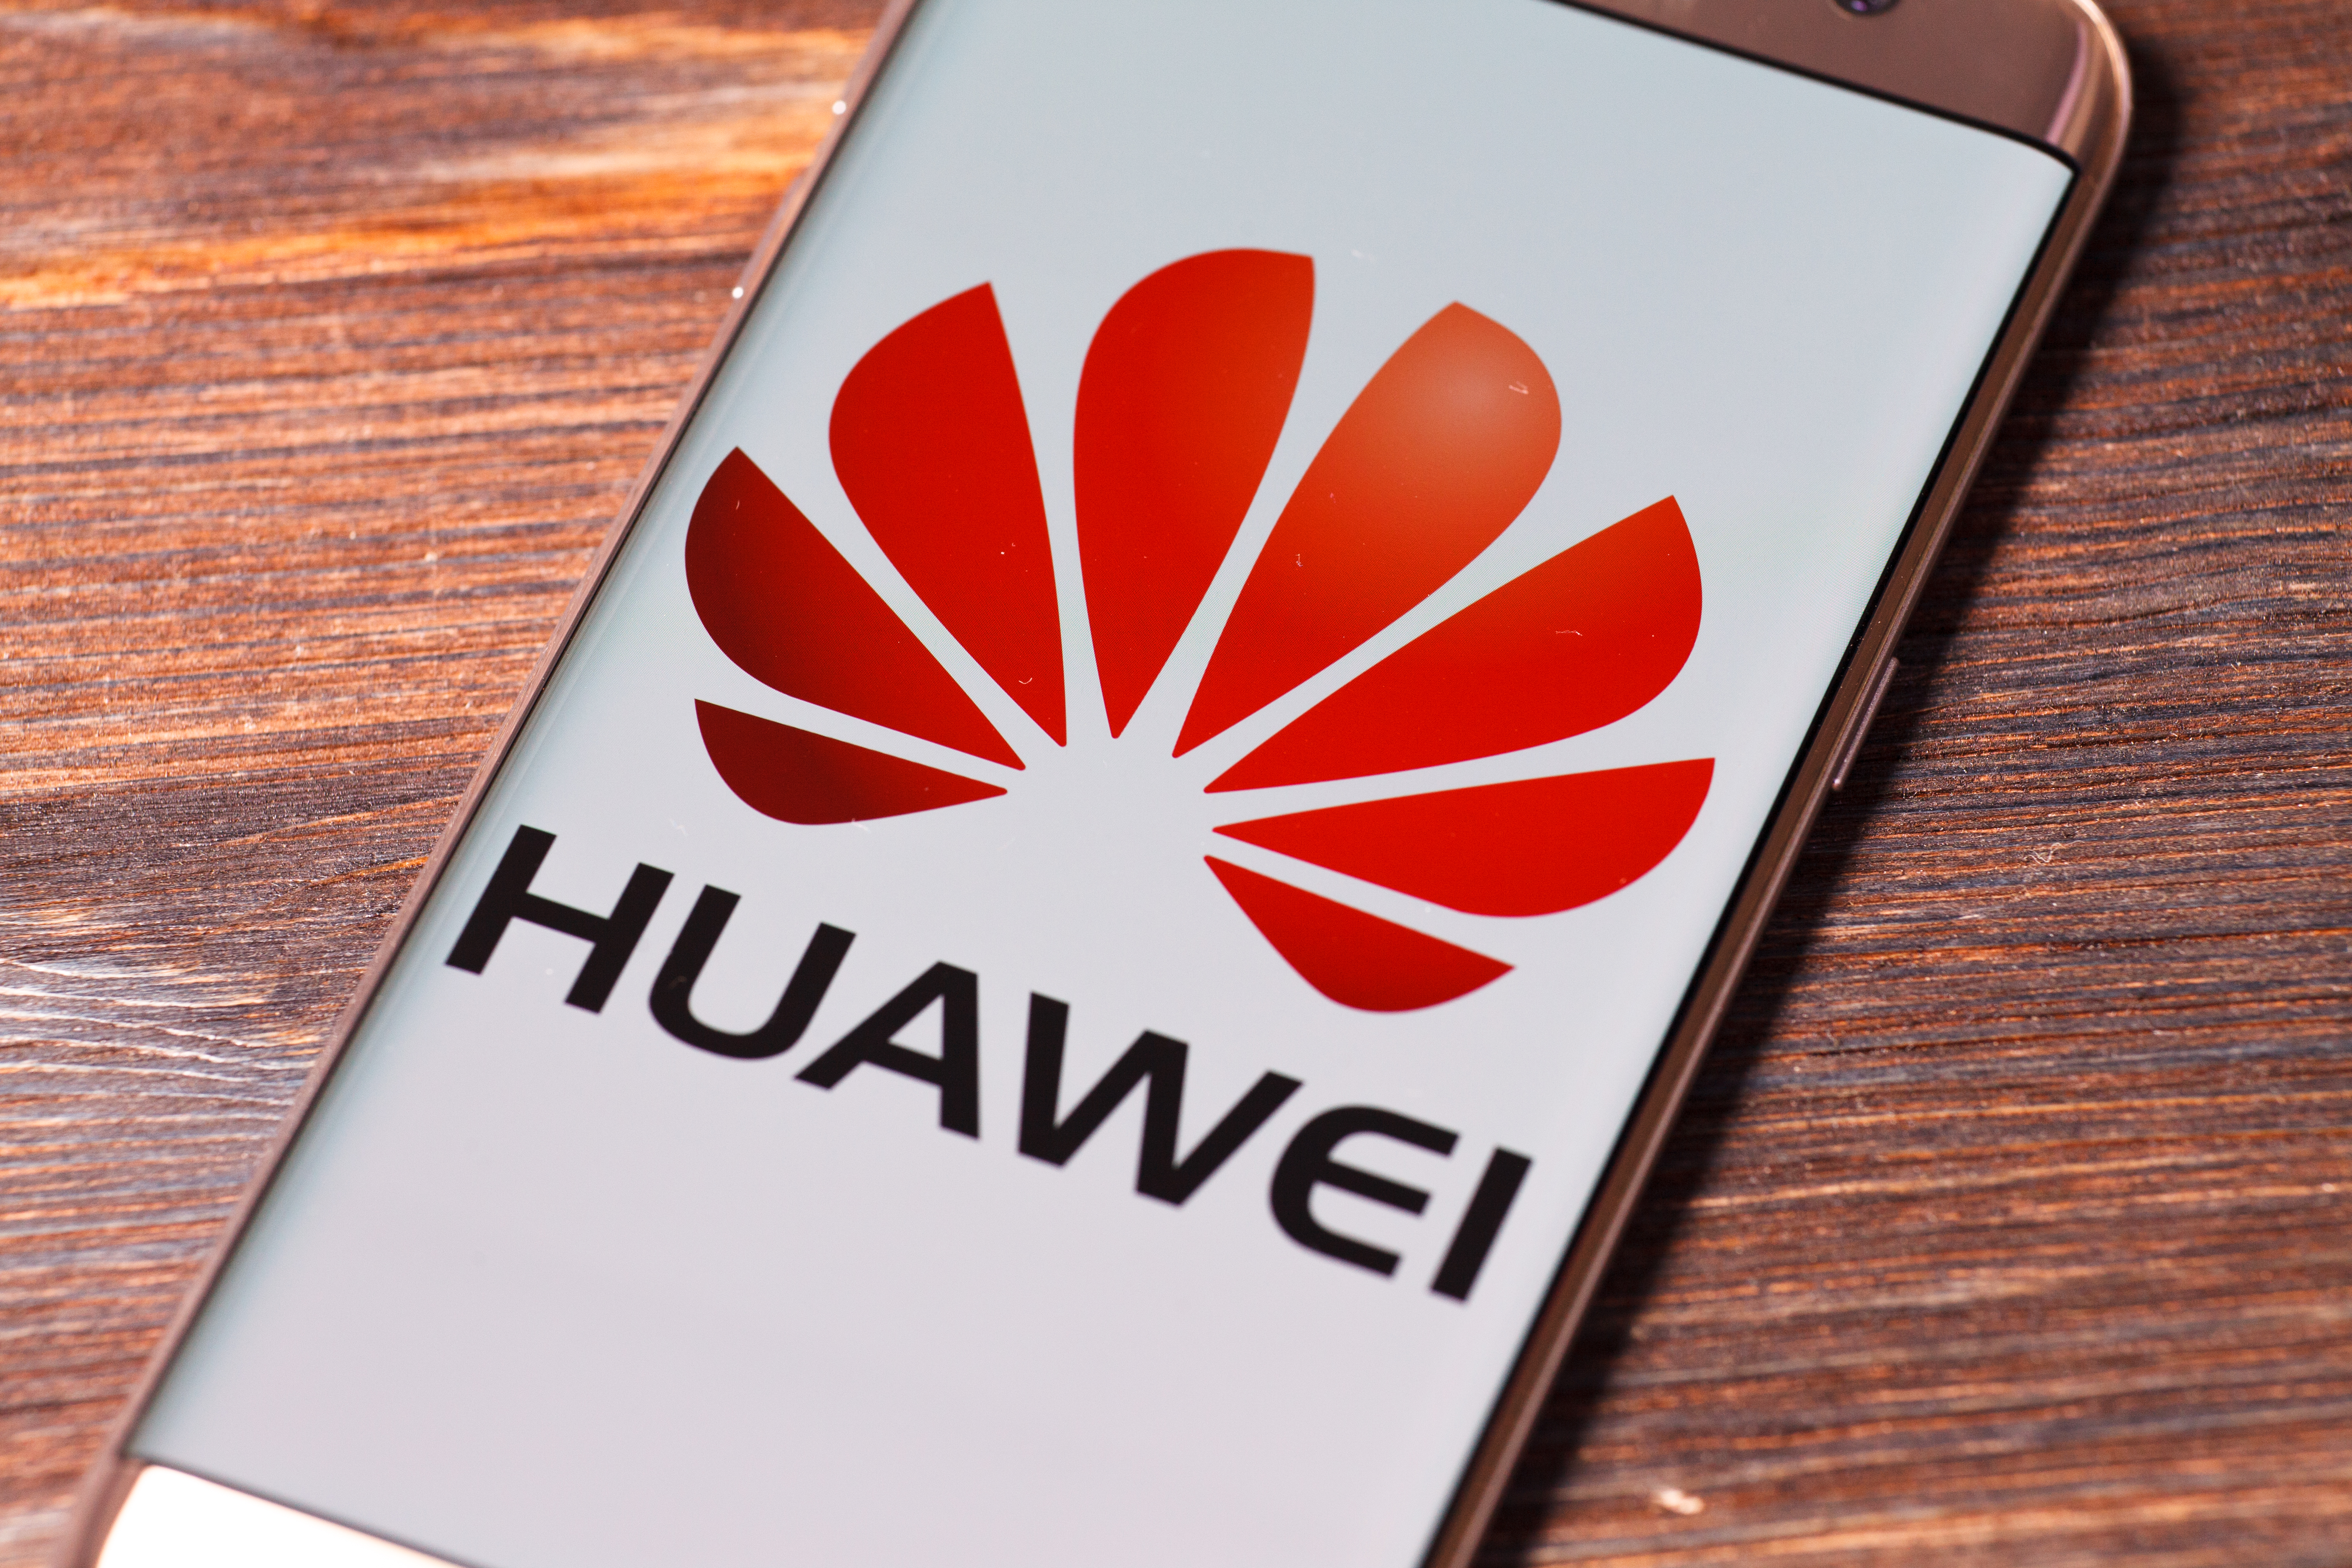 U.S. District Court Judge Rejects Huawei&#8217;s Claims Involving the National Defense Authorization Act